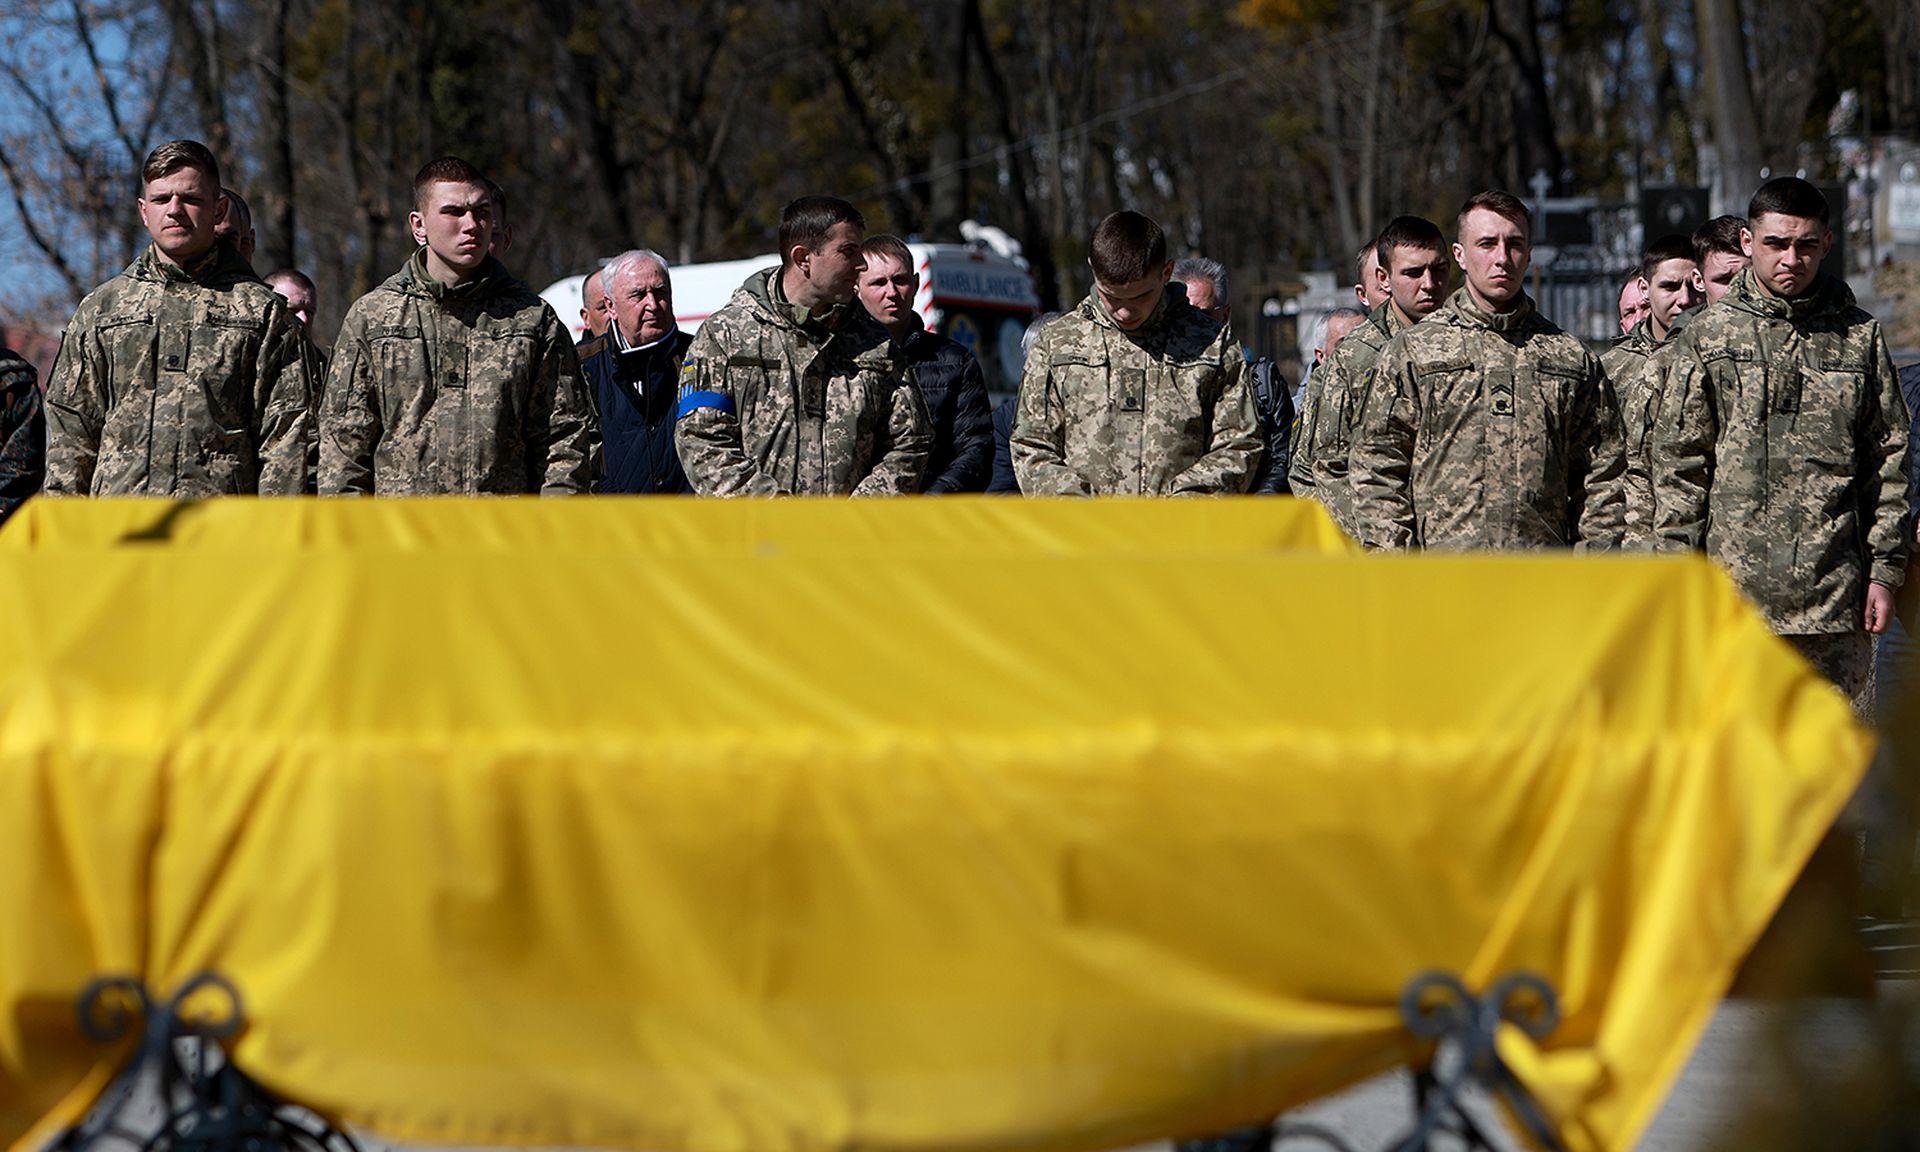 Nearly 90% of IT security professionals surveyed by Trellix and CSIS say they believe they&#8217;ve been the target of nation-state actors. Pictured: Mourners grieve over Ukrainian servicemen during a burial service at the Lychakiv Cemetery on March 28, 2022, in Lviv, Ukraine. (Photo by Joe Raedle/Getty Images)